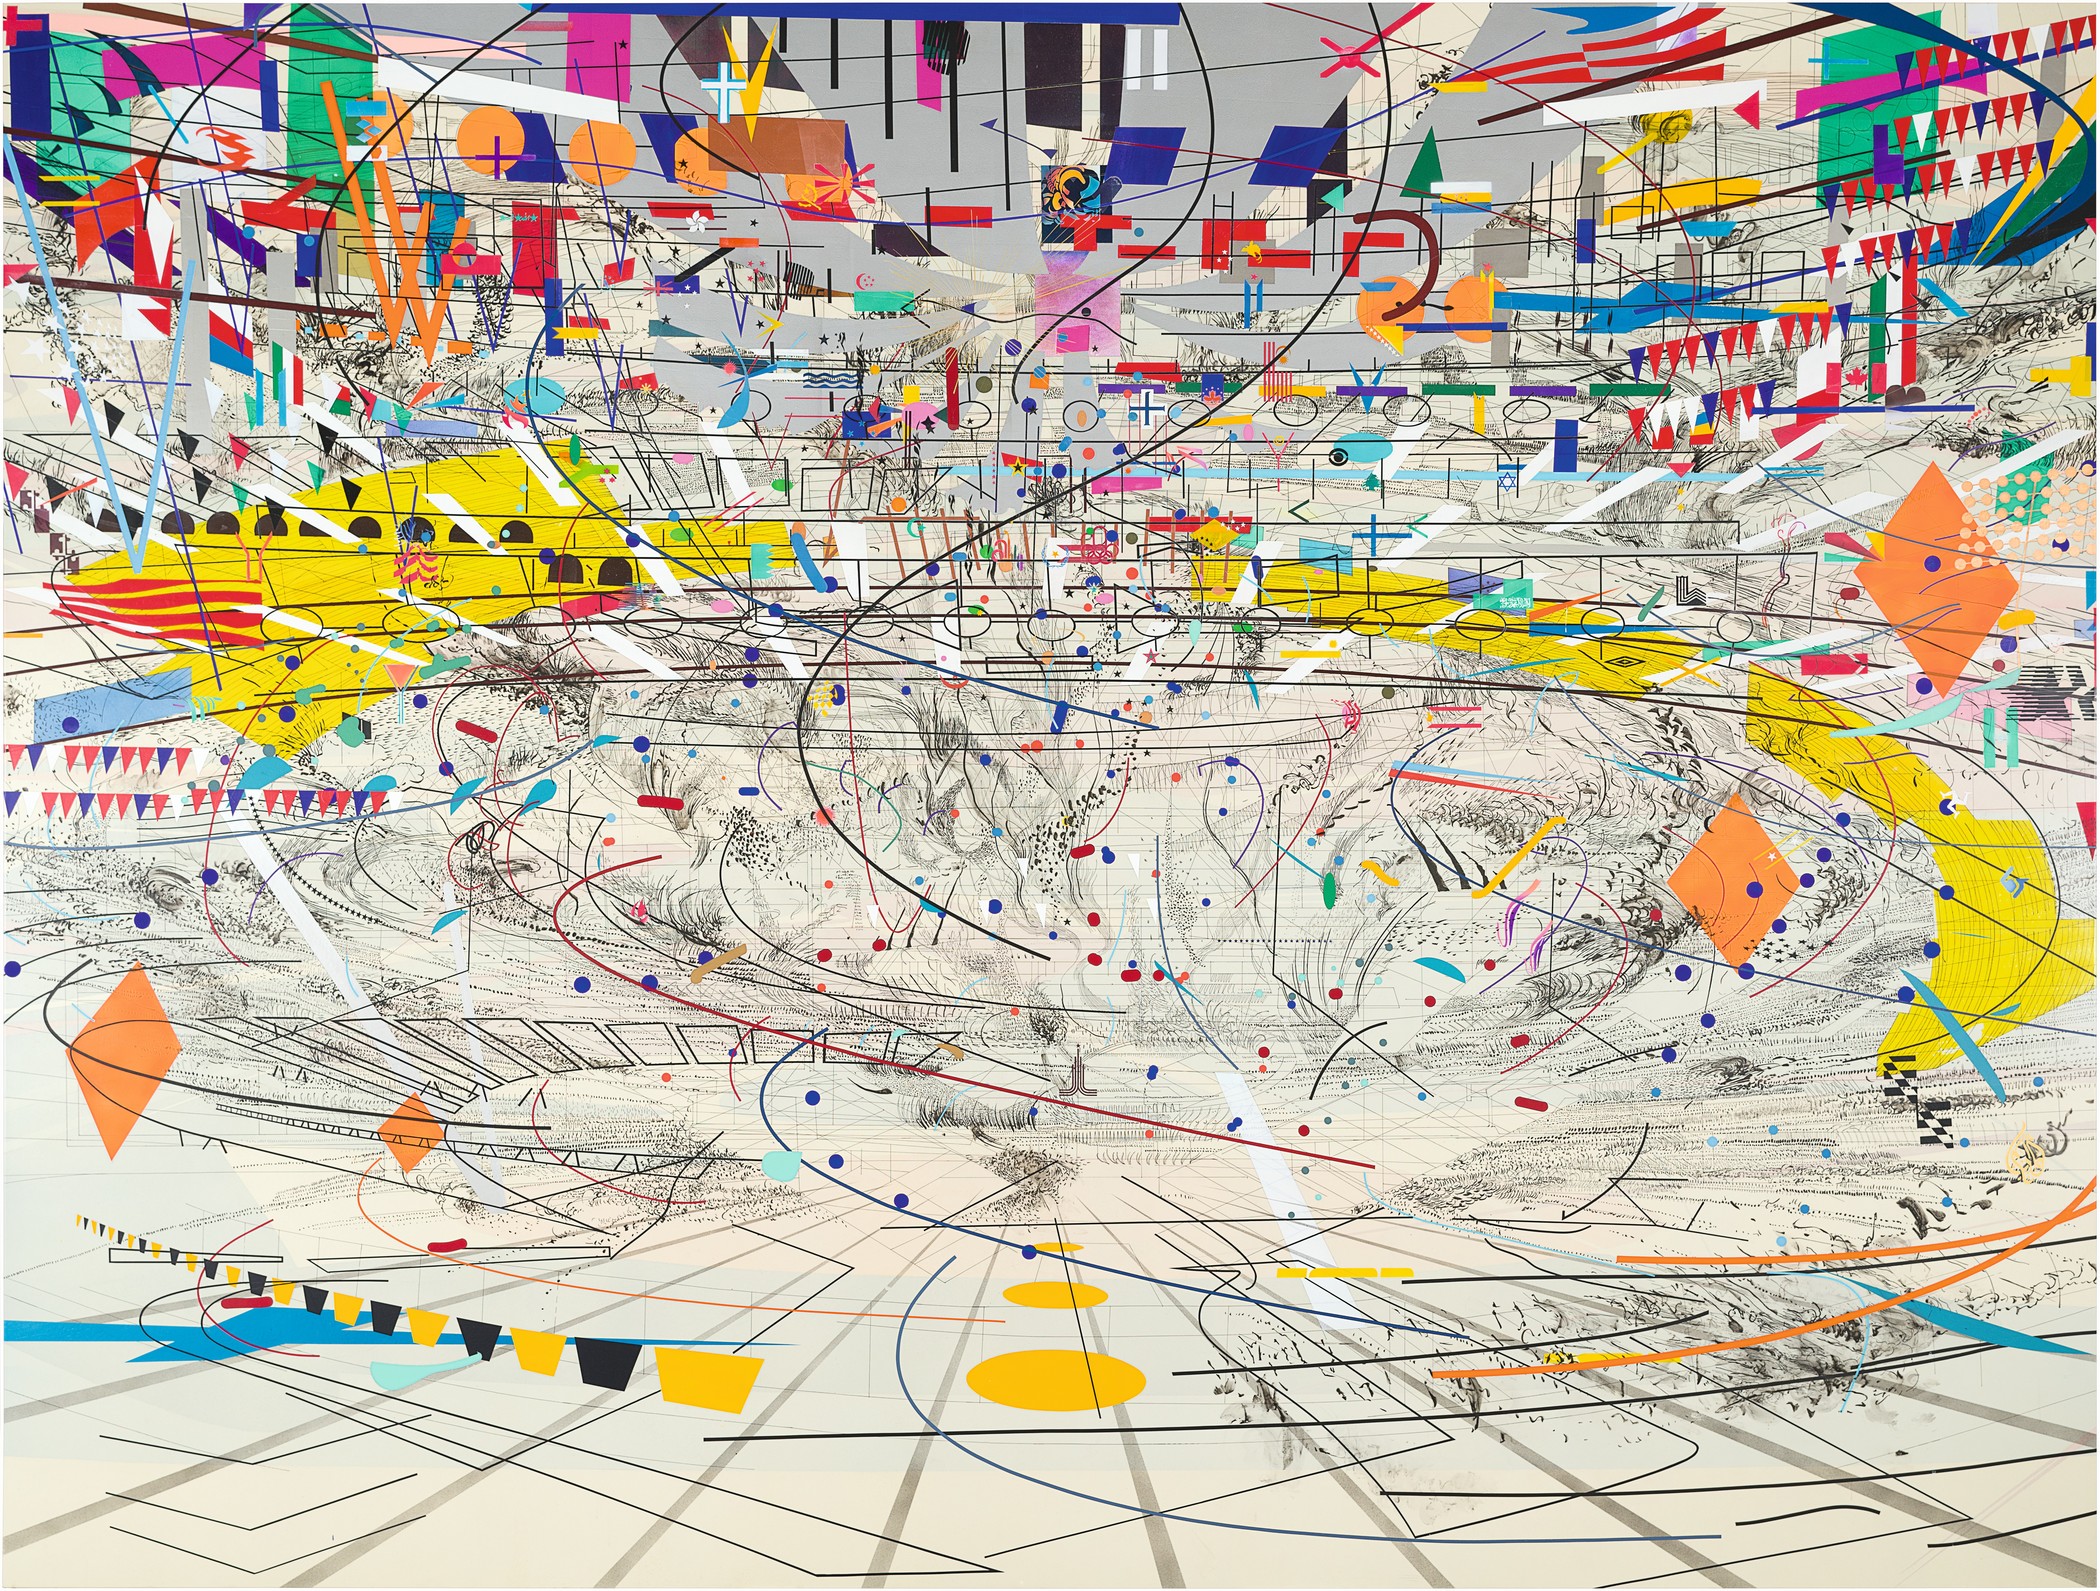 Julie Mehretu, Stadia II, 2004, Carnegie Museum of Art, Pittsburgh, gift of Jeanne Greenberg Rohatyn and Nicolas Rohatyn and A. W. Mellon Acquisition Endowment Fund 2004.50, © Julie Mehretu, photograph courtesy of the Carnegie Museum of Art